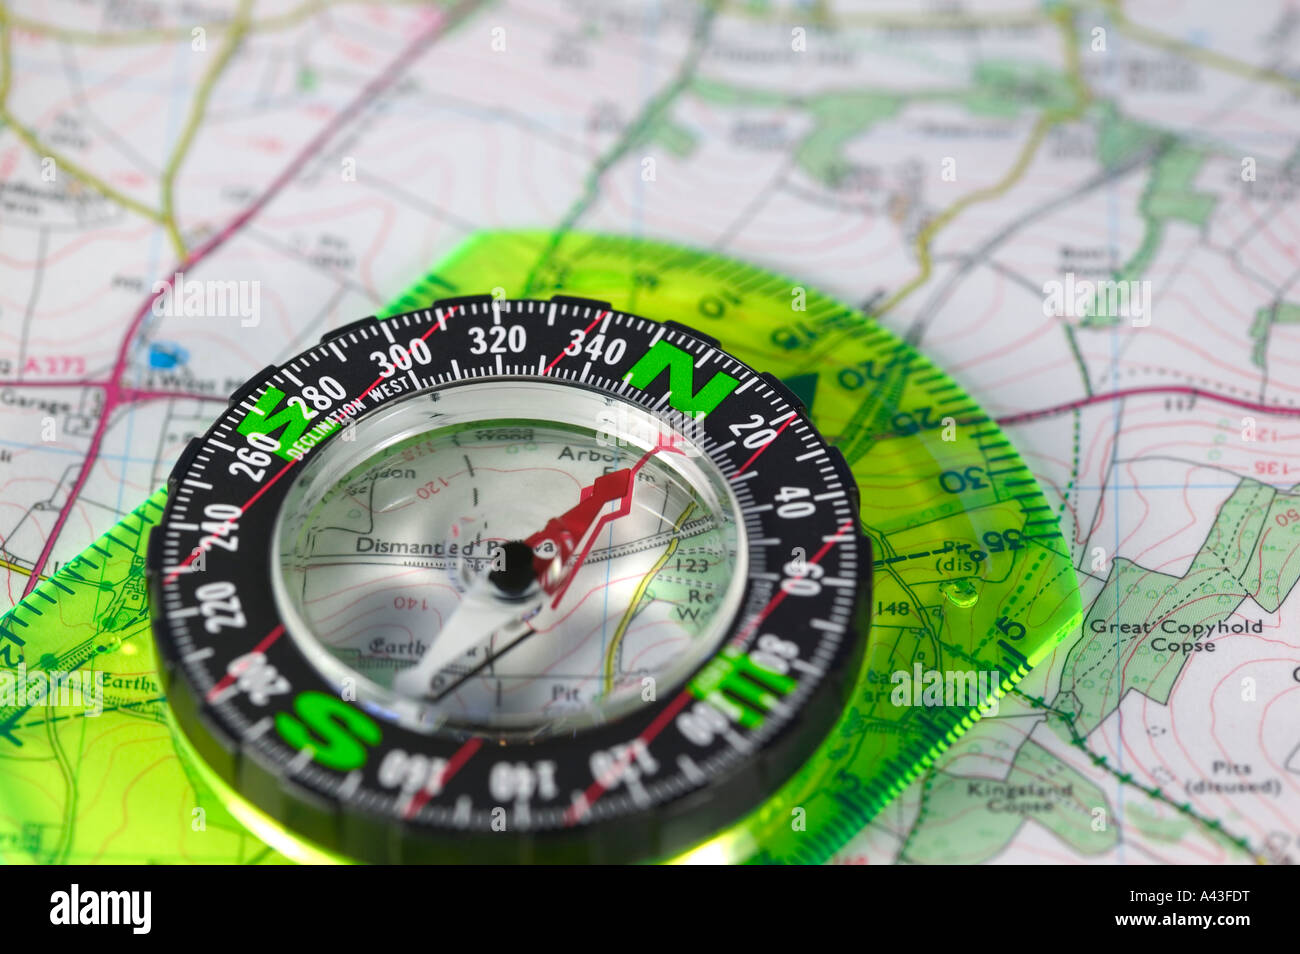 An orienteering compass laid on a map Stock Photo